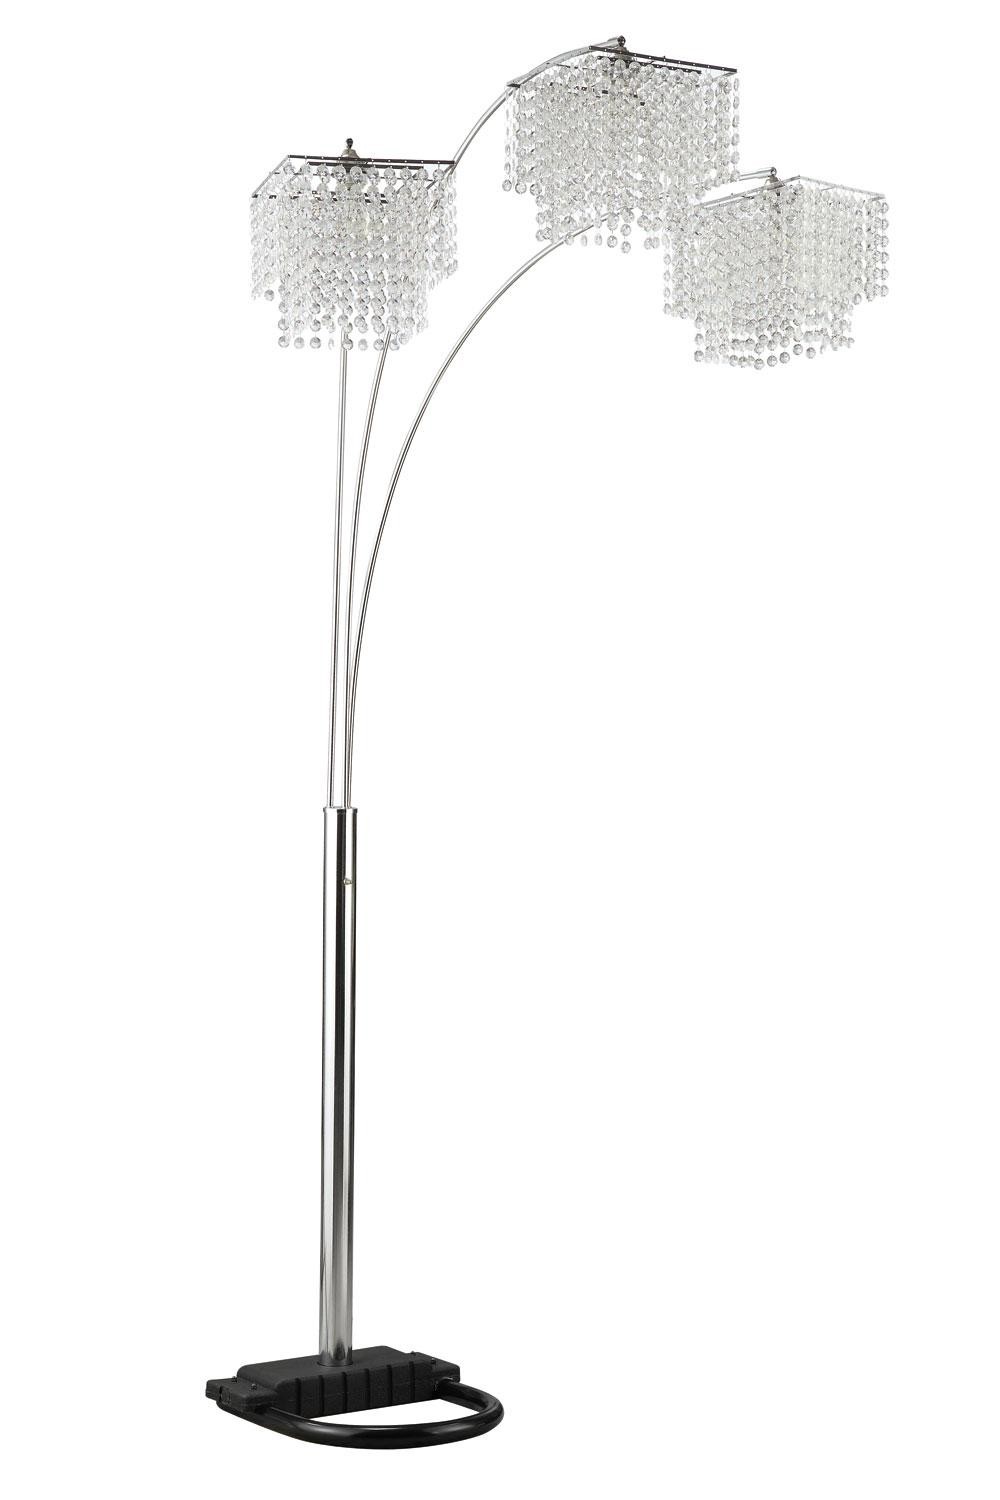 Add Glamor to your home with Floor lamp chandelier - Warisan Lighting